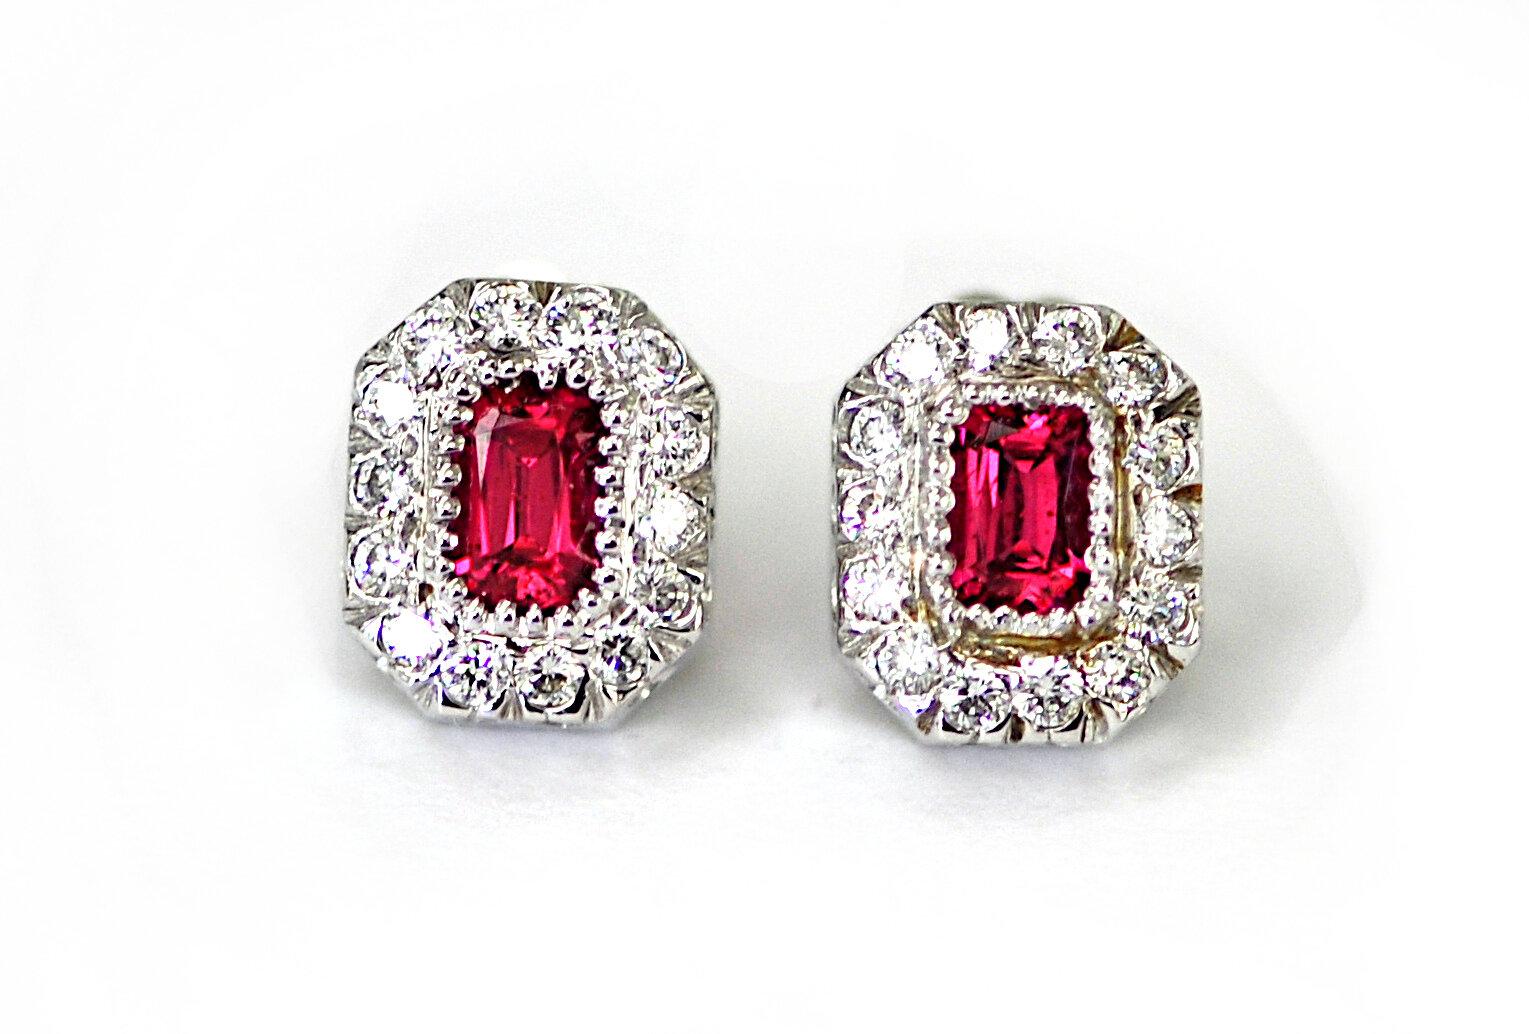 0.71ct Red Spinel Earrings